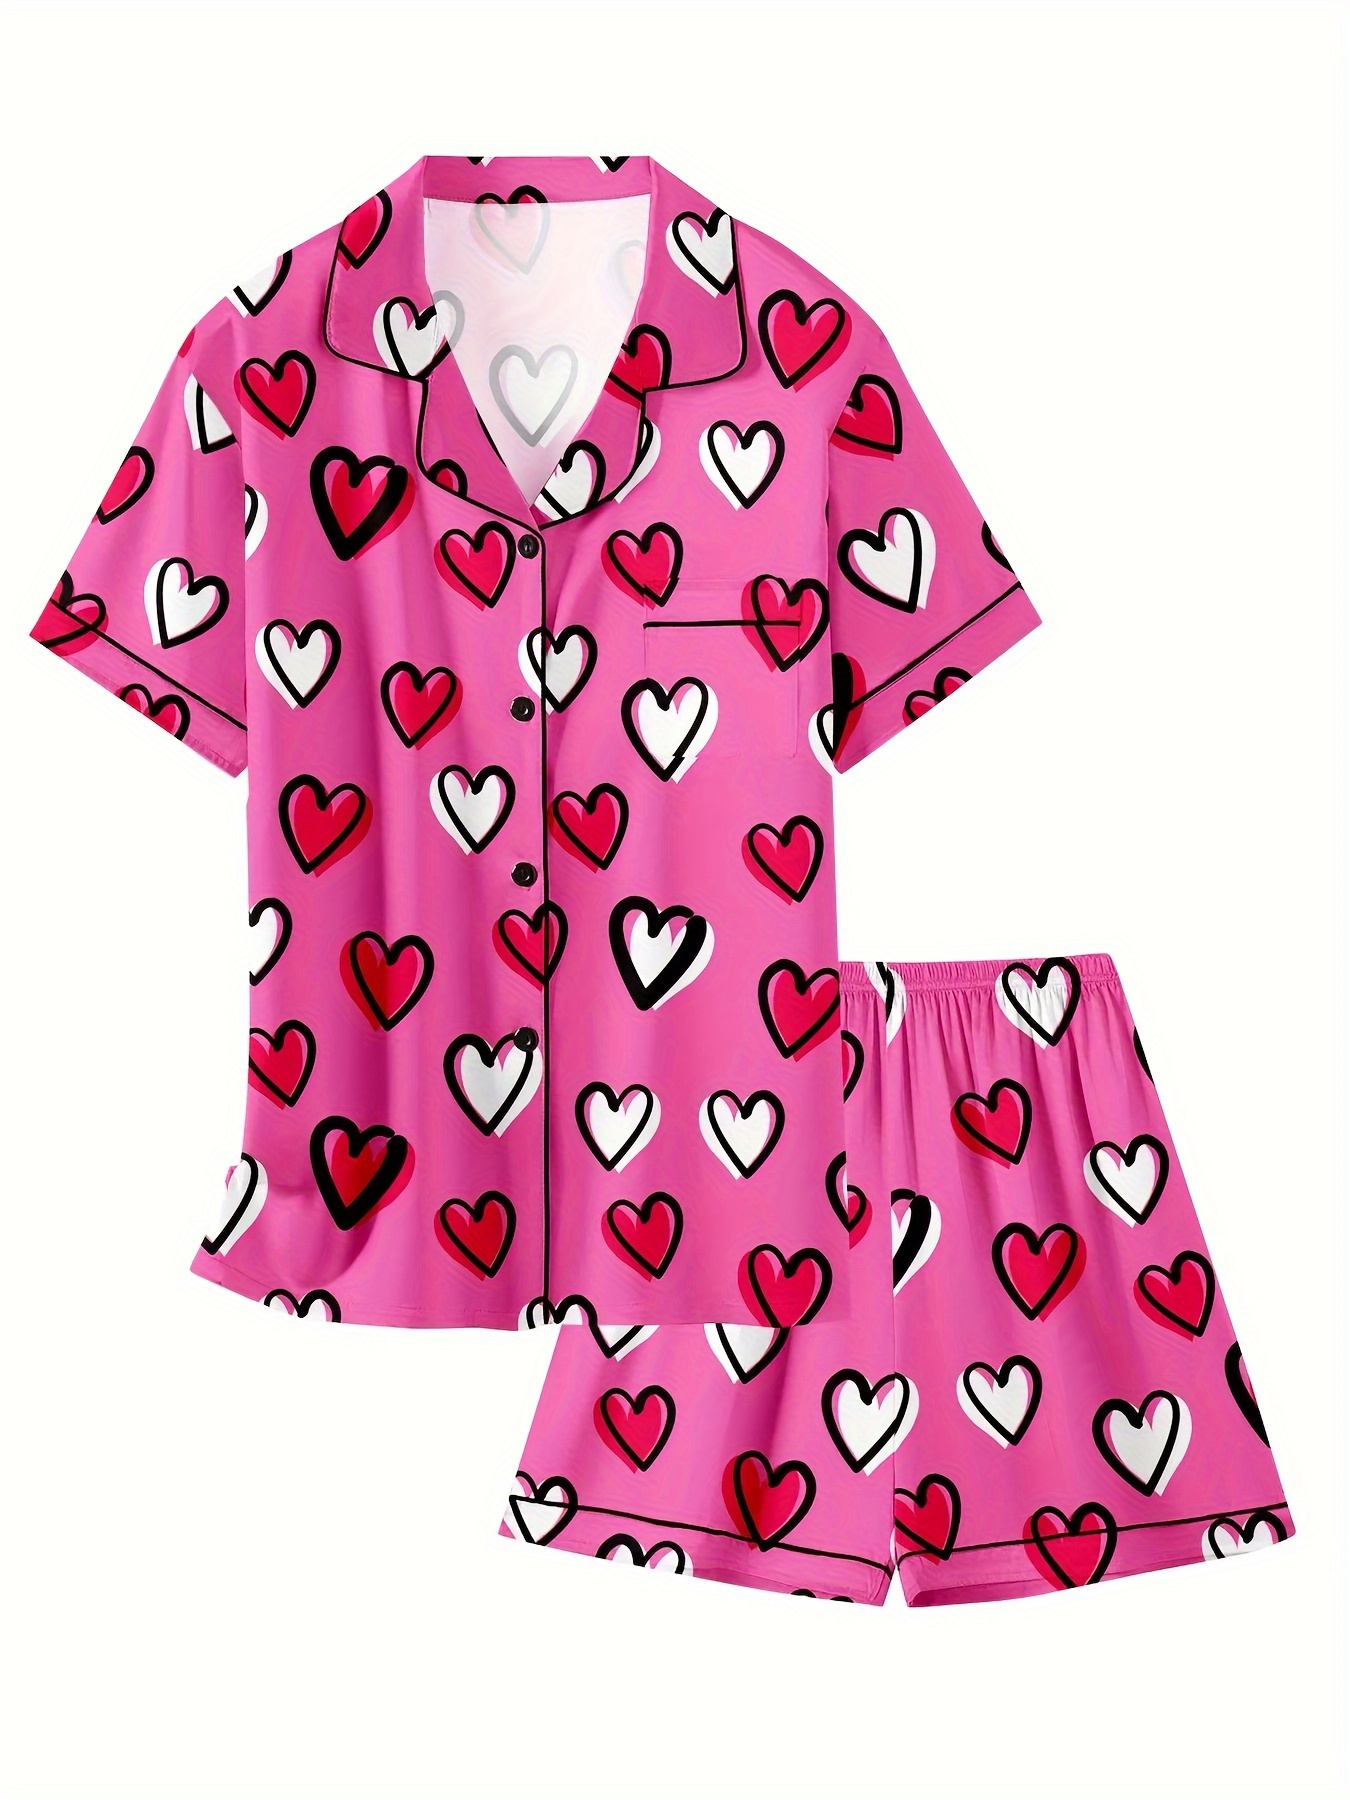 Shop Fancy Pajamas for Valentine's Day, WFH, and Beyond - Coveteur